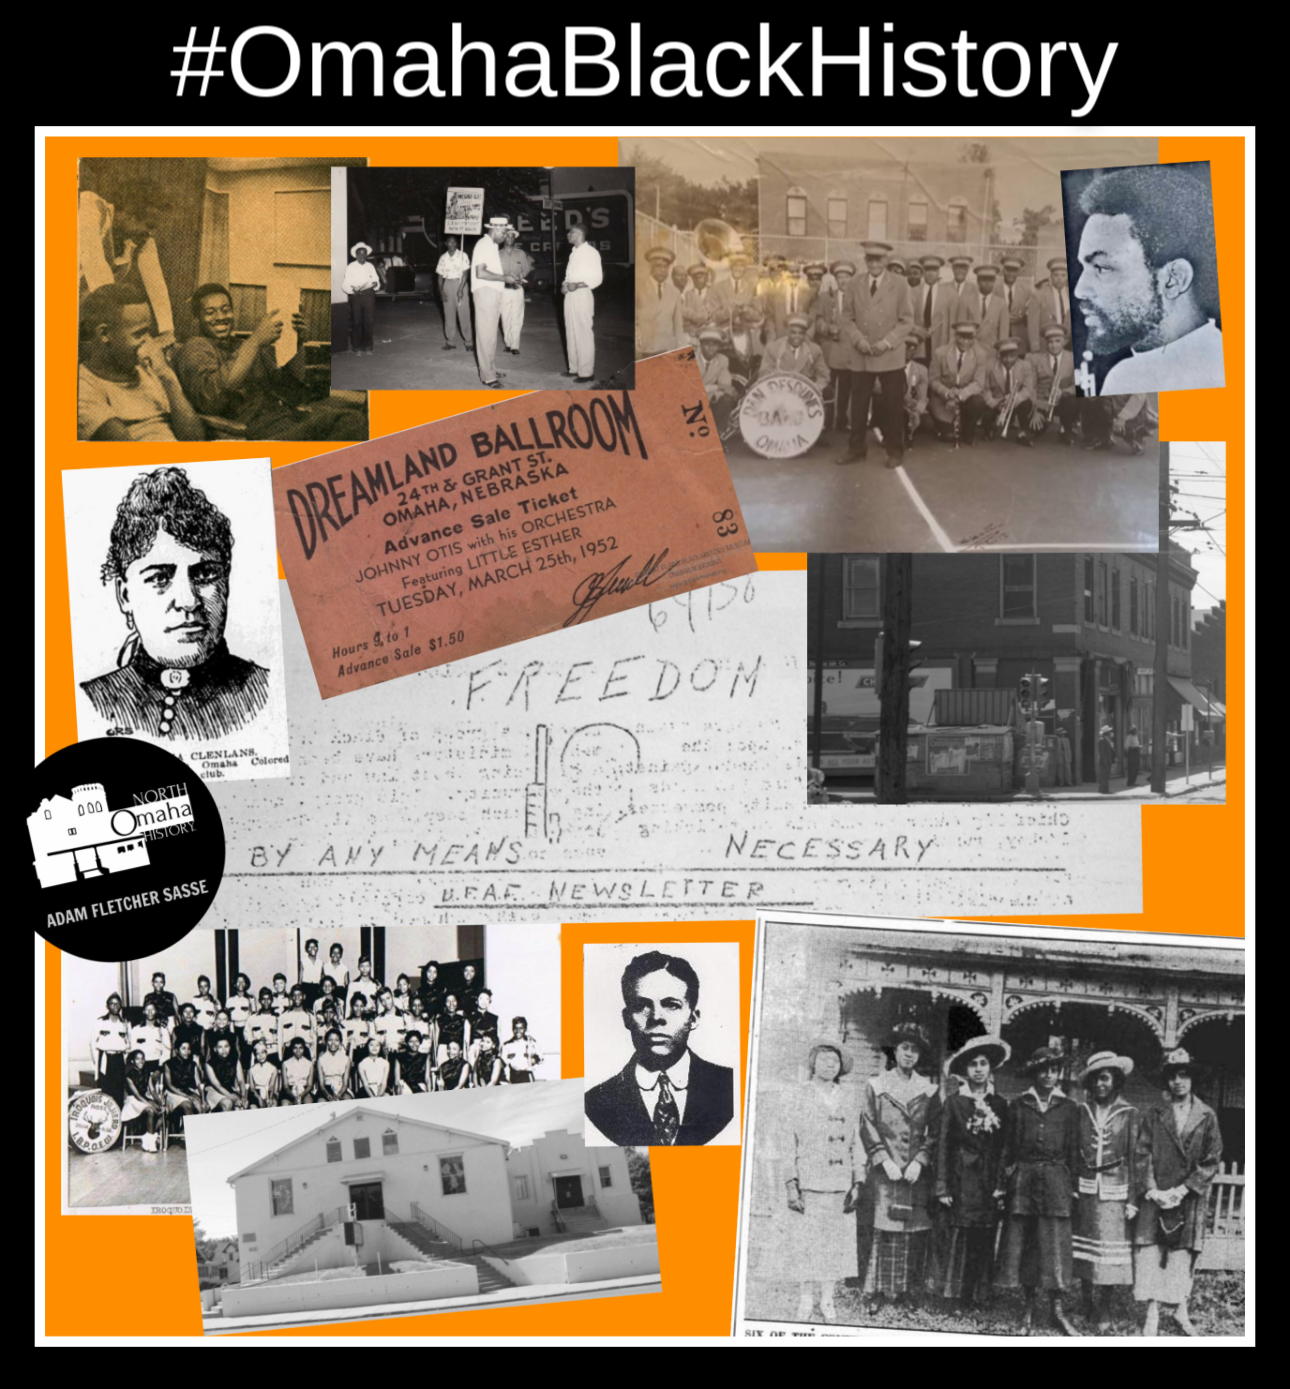 Look for details on your favorite social media with #OmahaBlackHistory